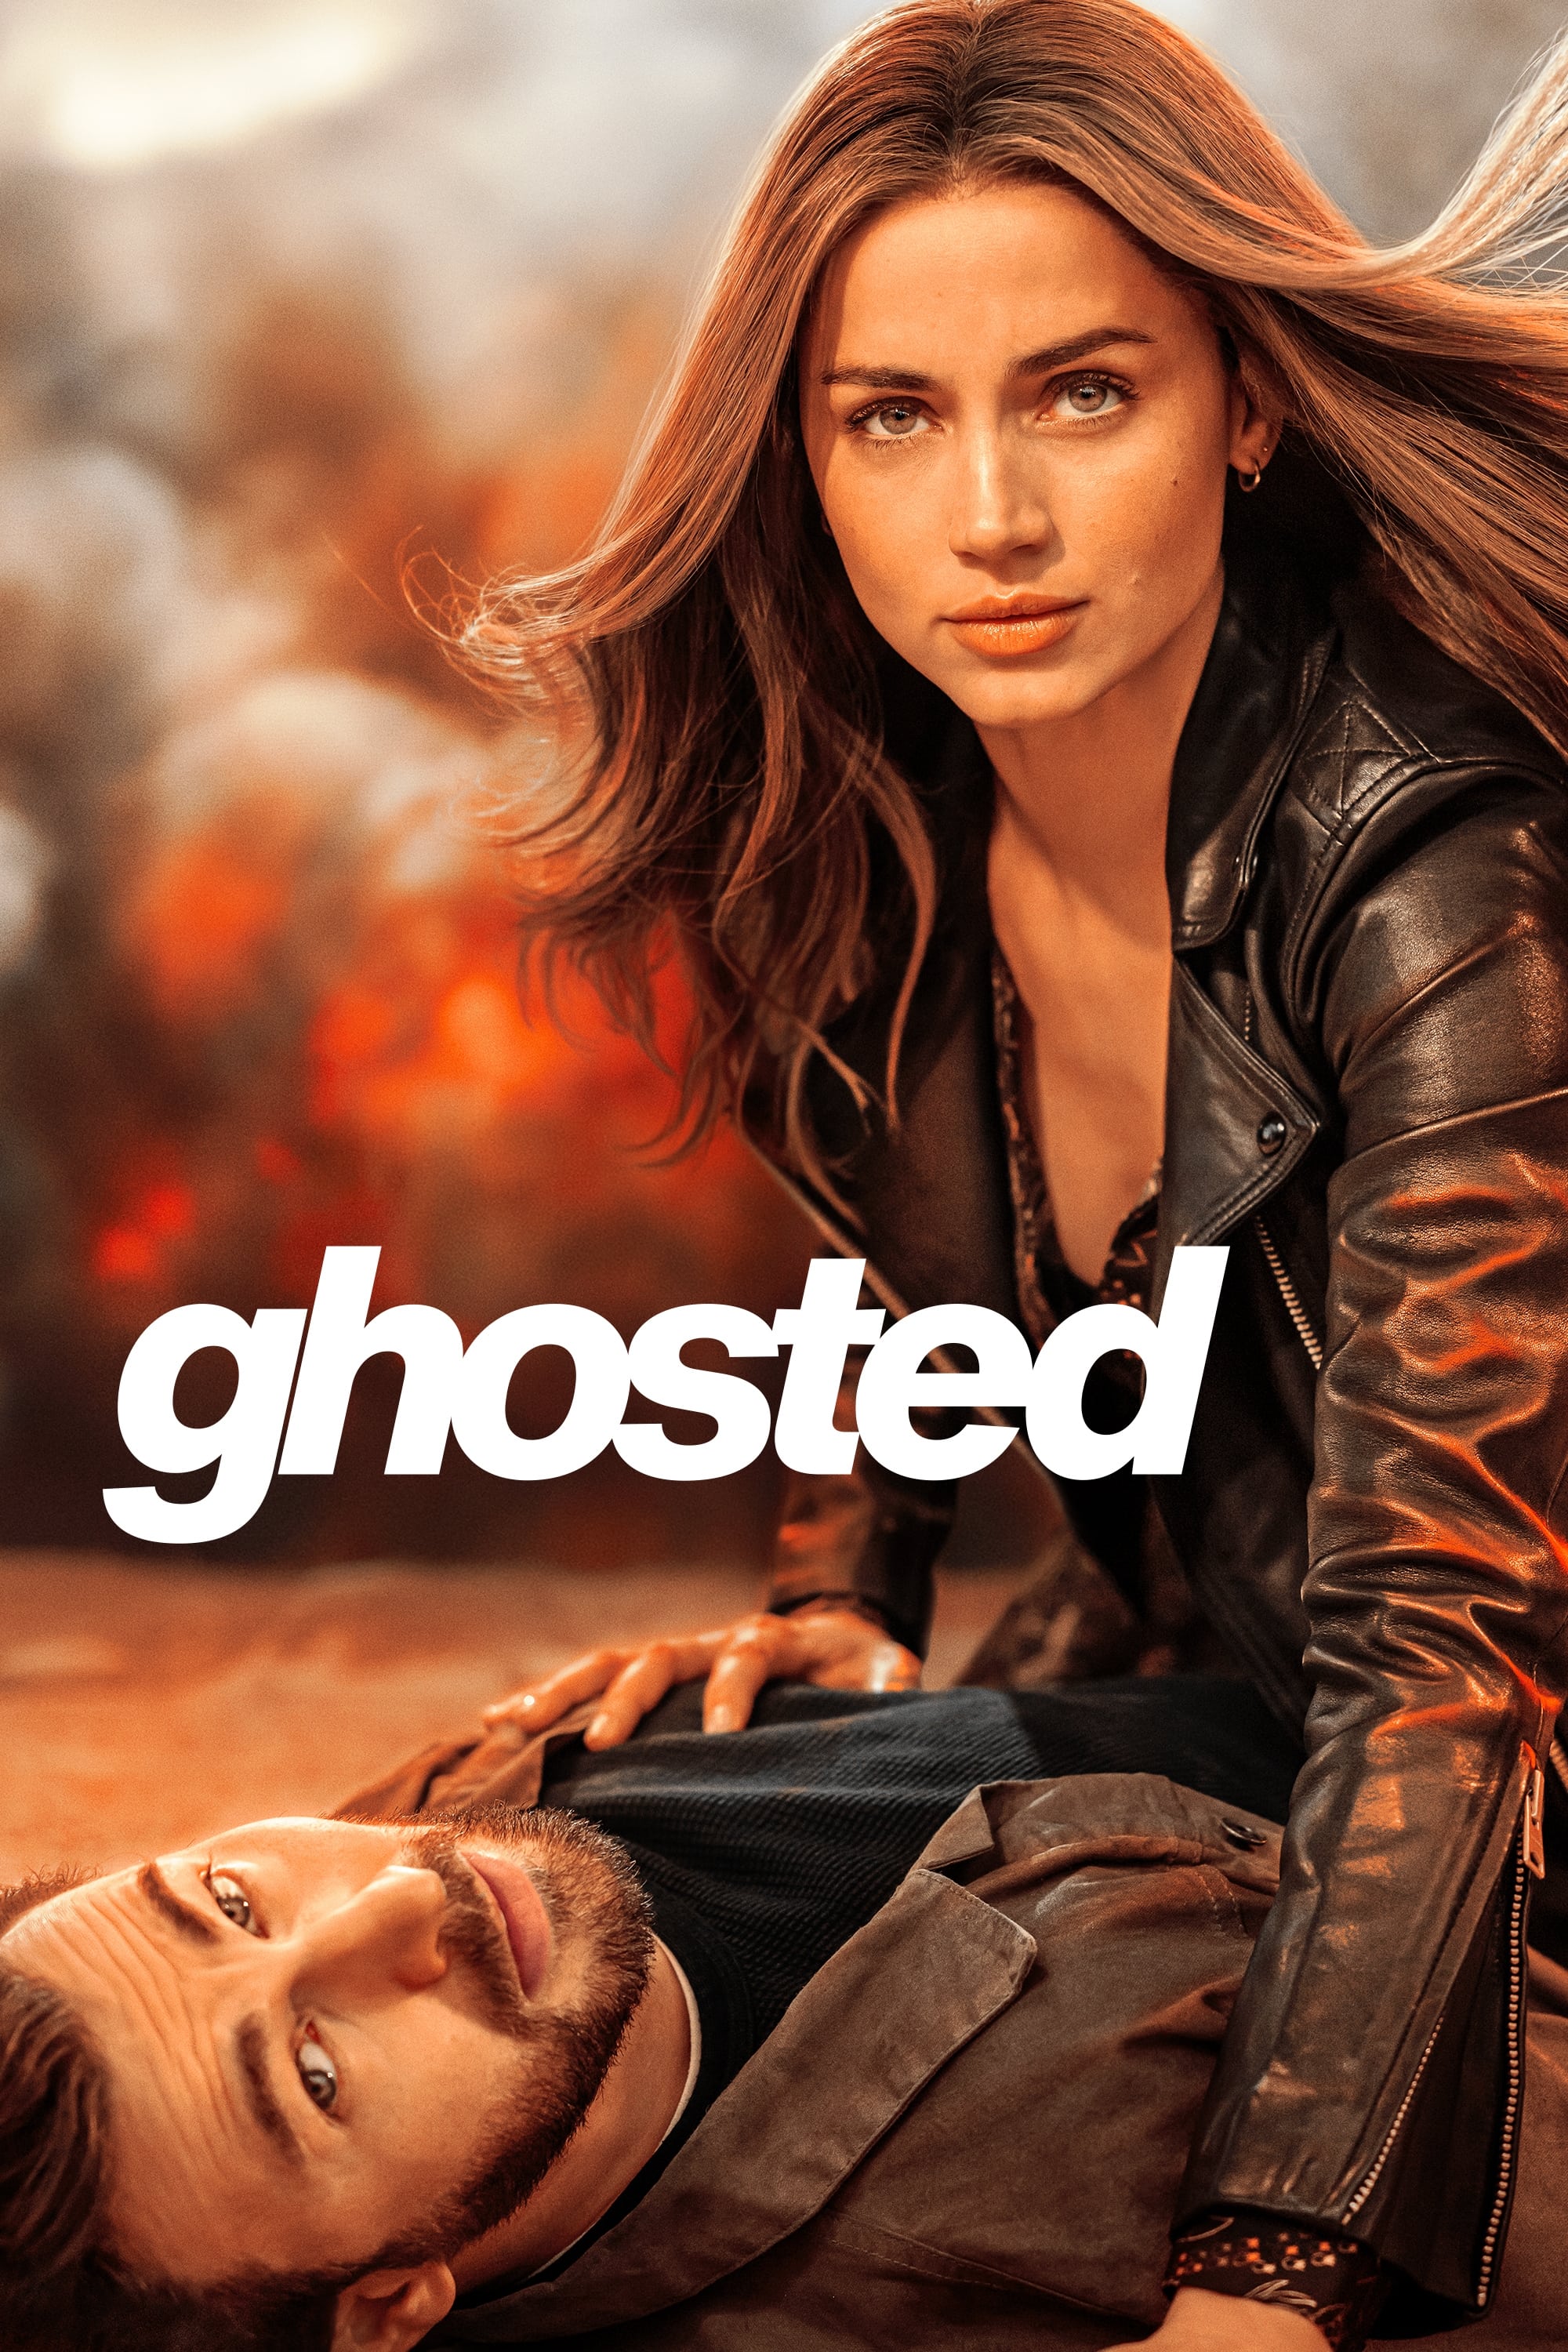 Ghosted Movie Poster